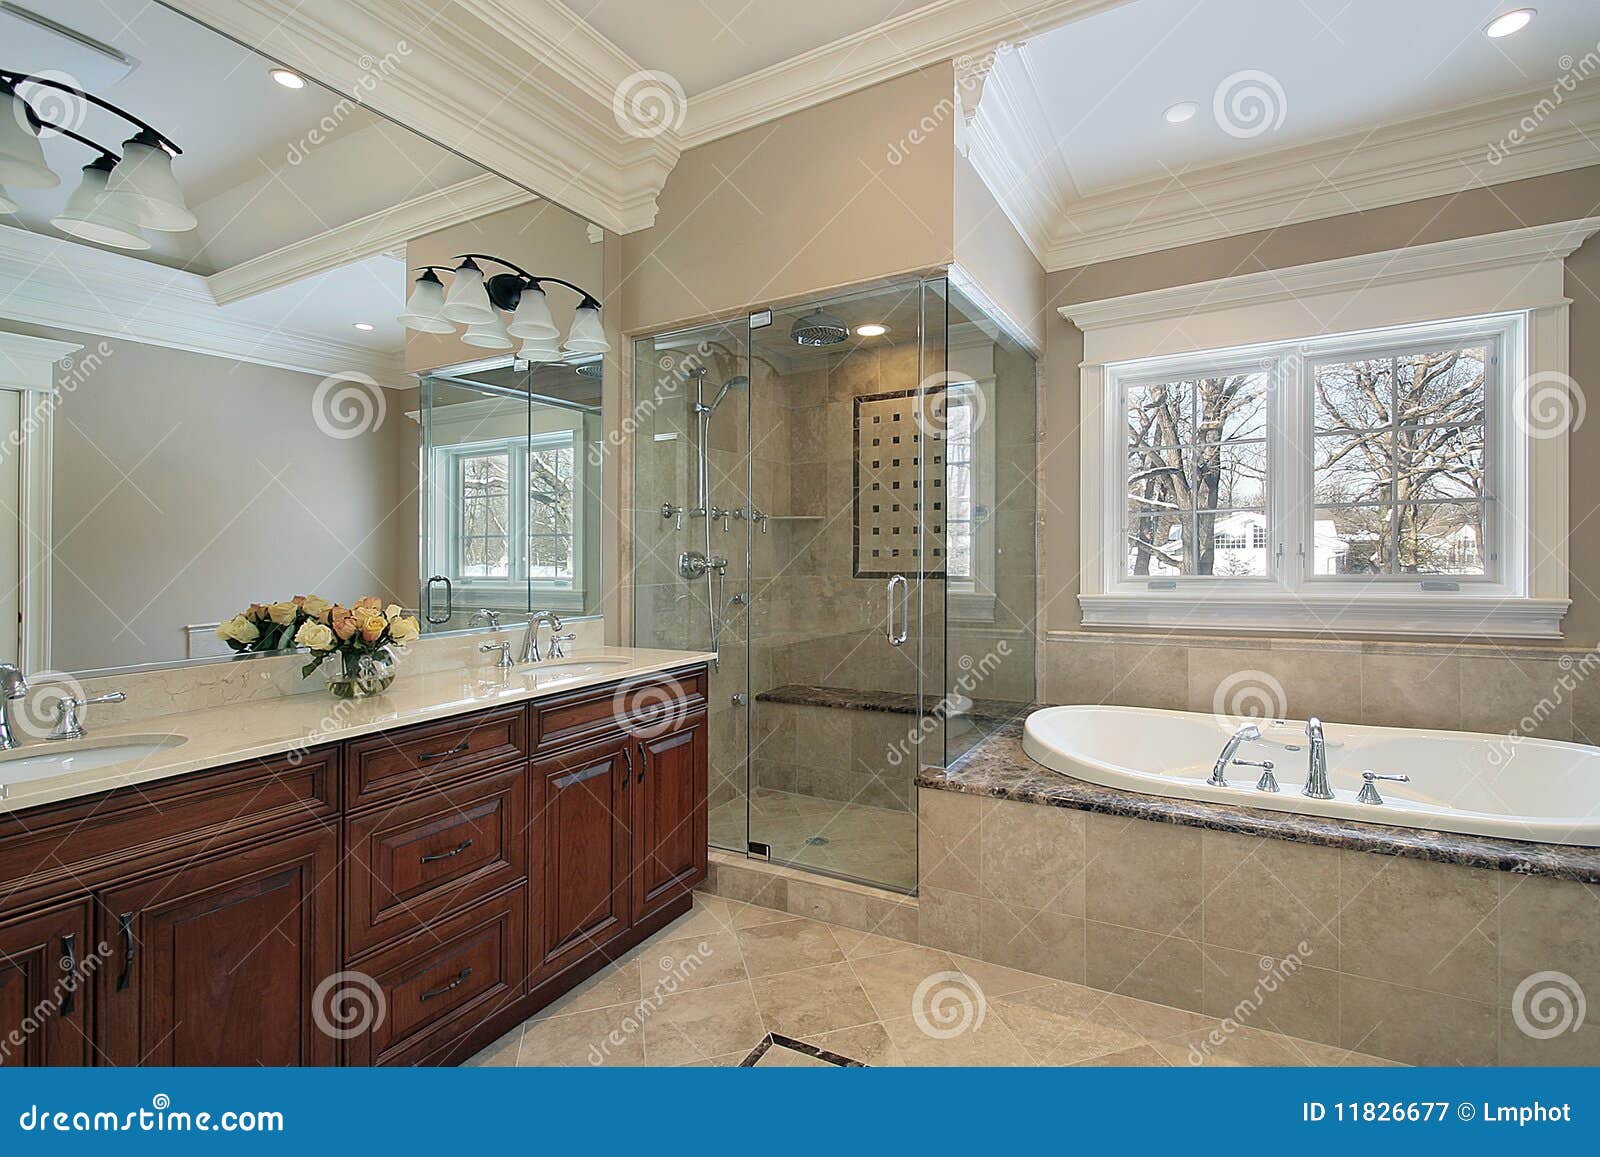 master bath with glass shower